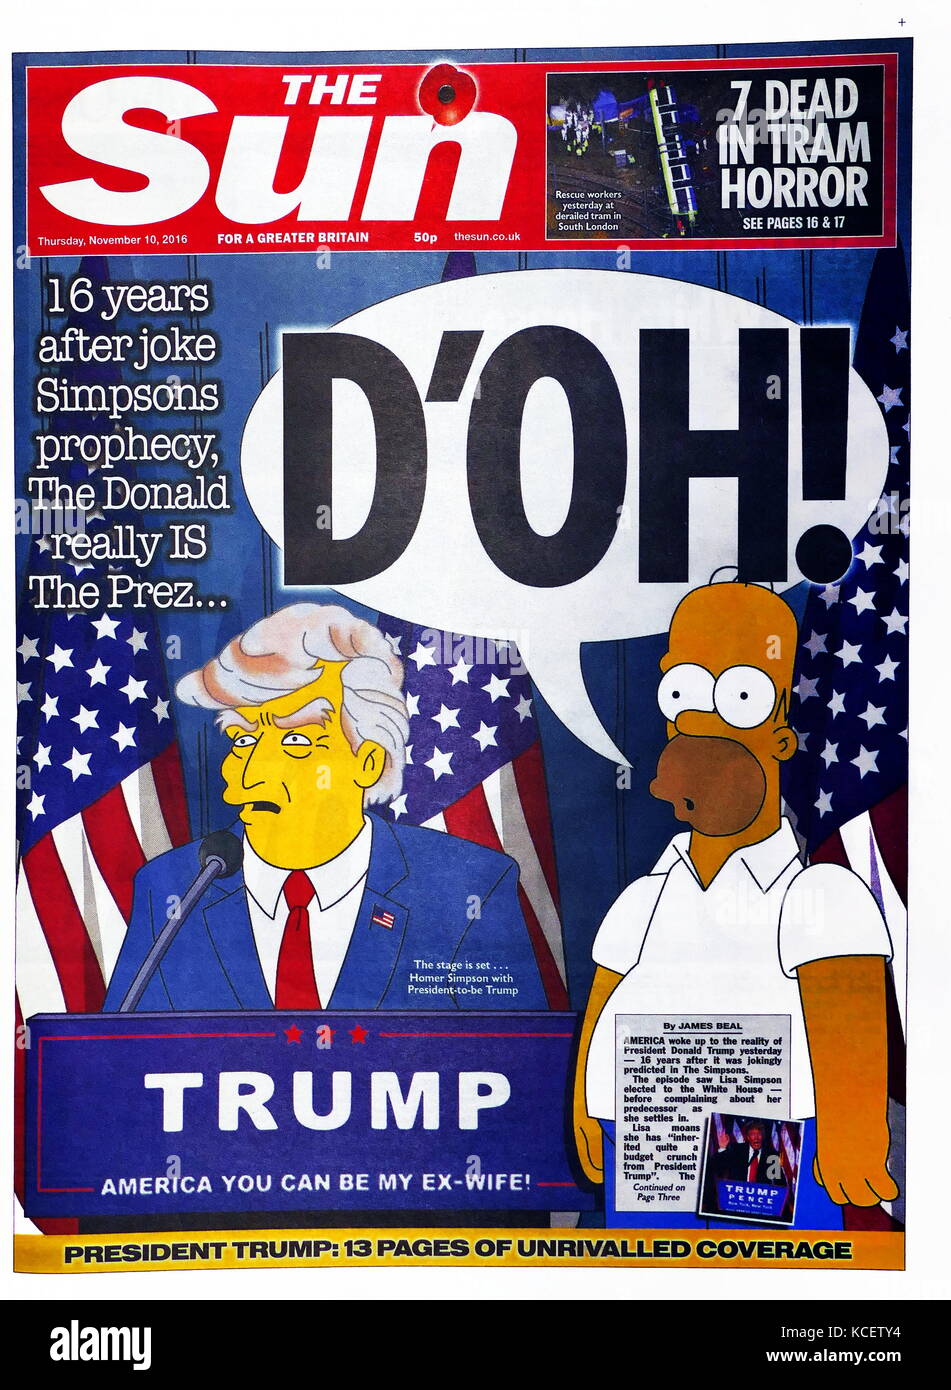 D'oh!' Headline in the British newspaper 'The Sun' front page, 10th November 2016. After the election of Donald Trump as president of the United States. Depicts Homer Simpson the cartoon character appalled at the election of Trump. Stock Photo